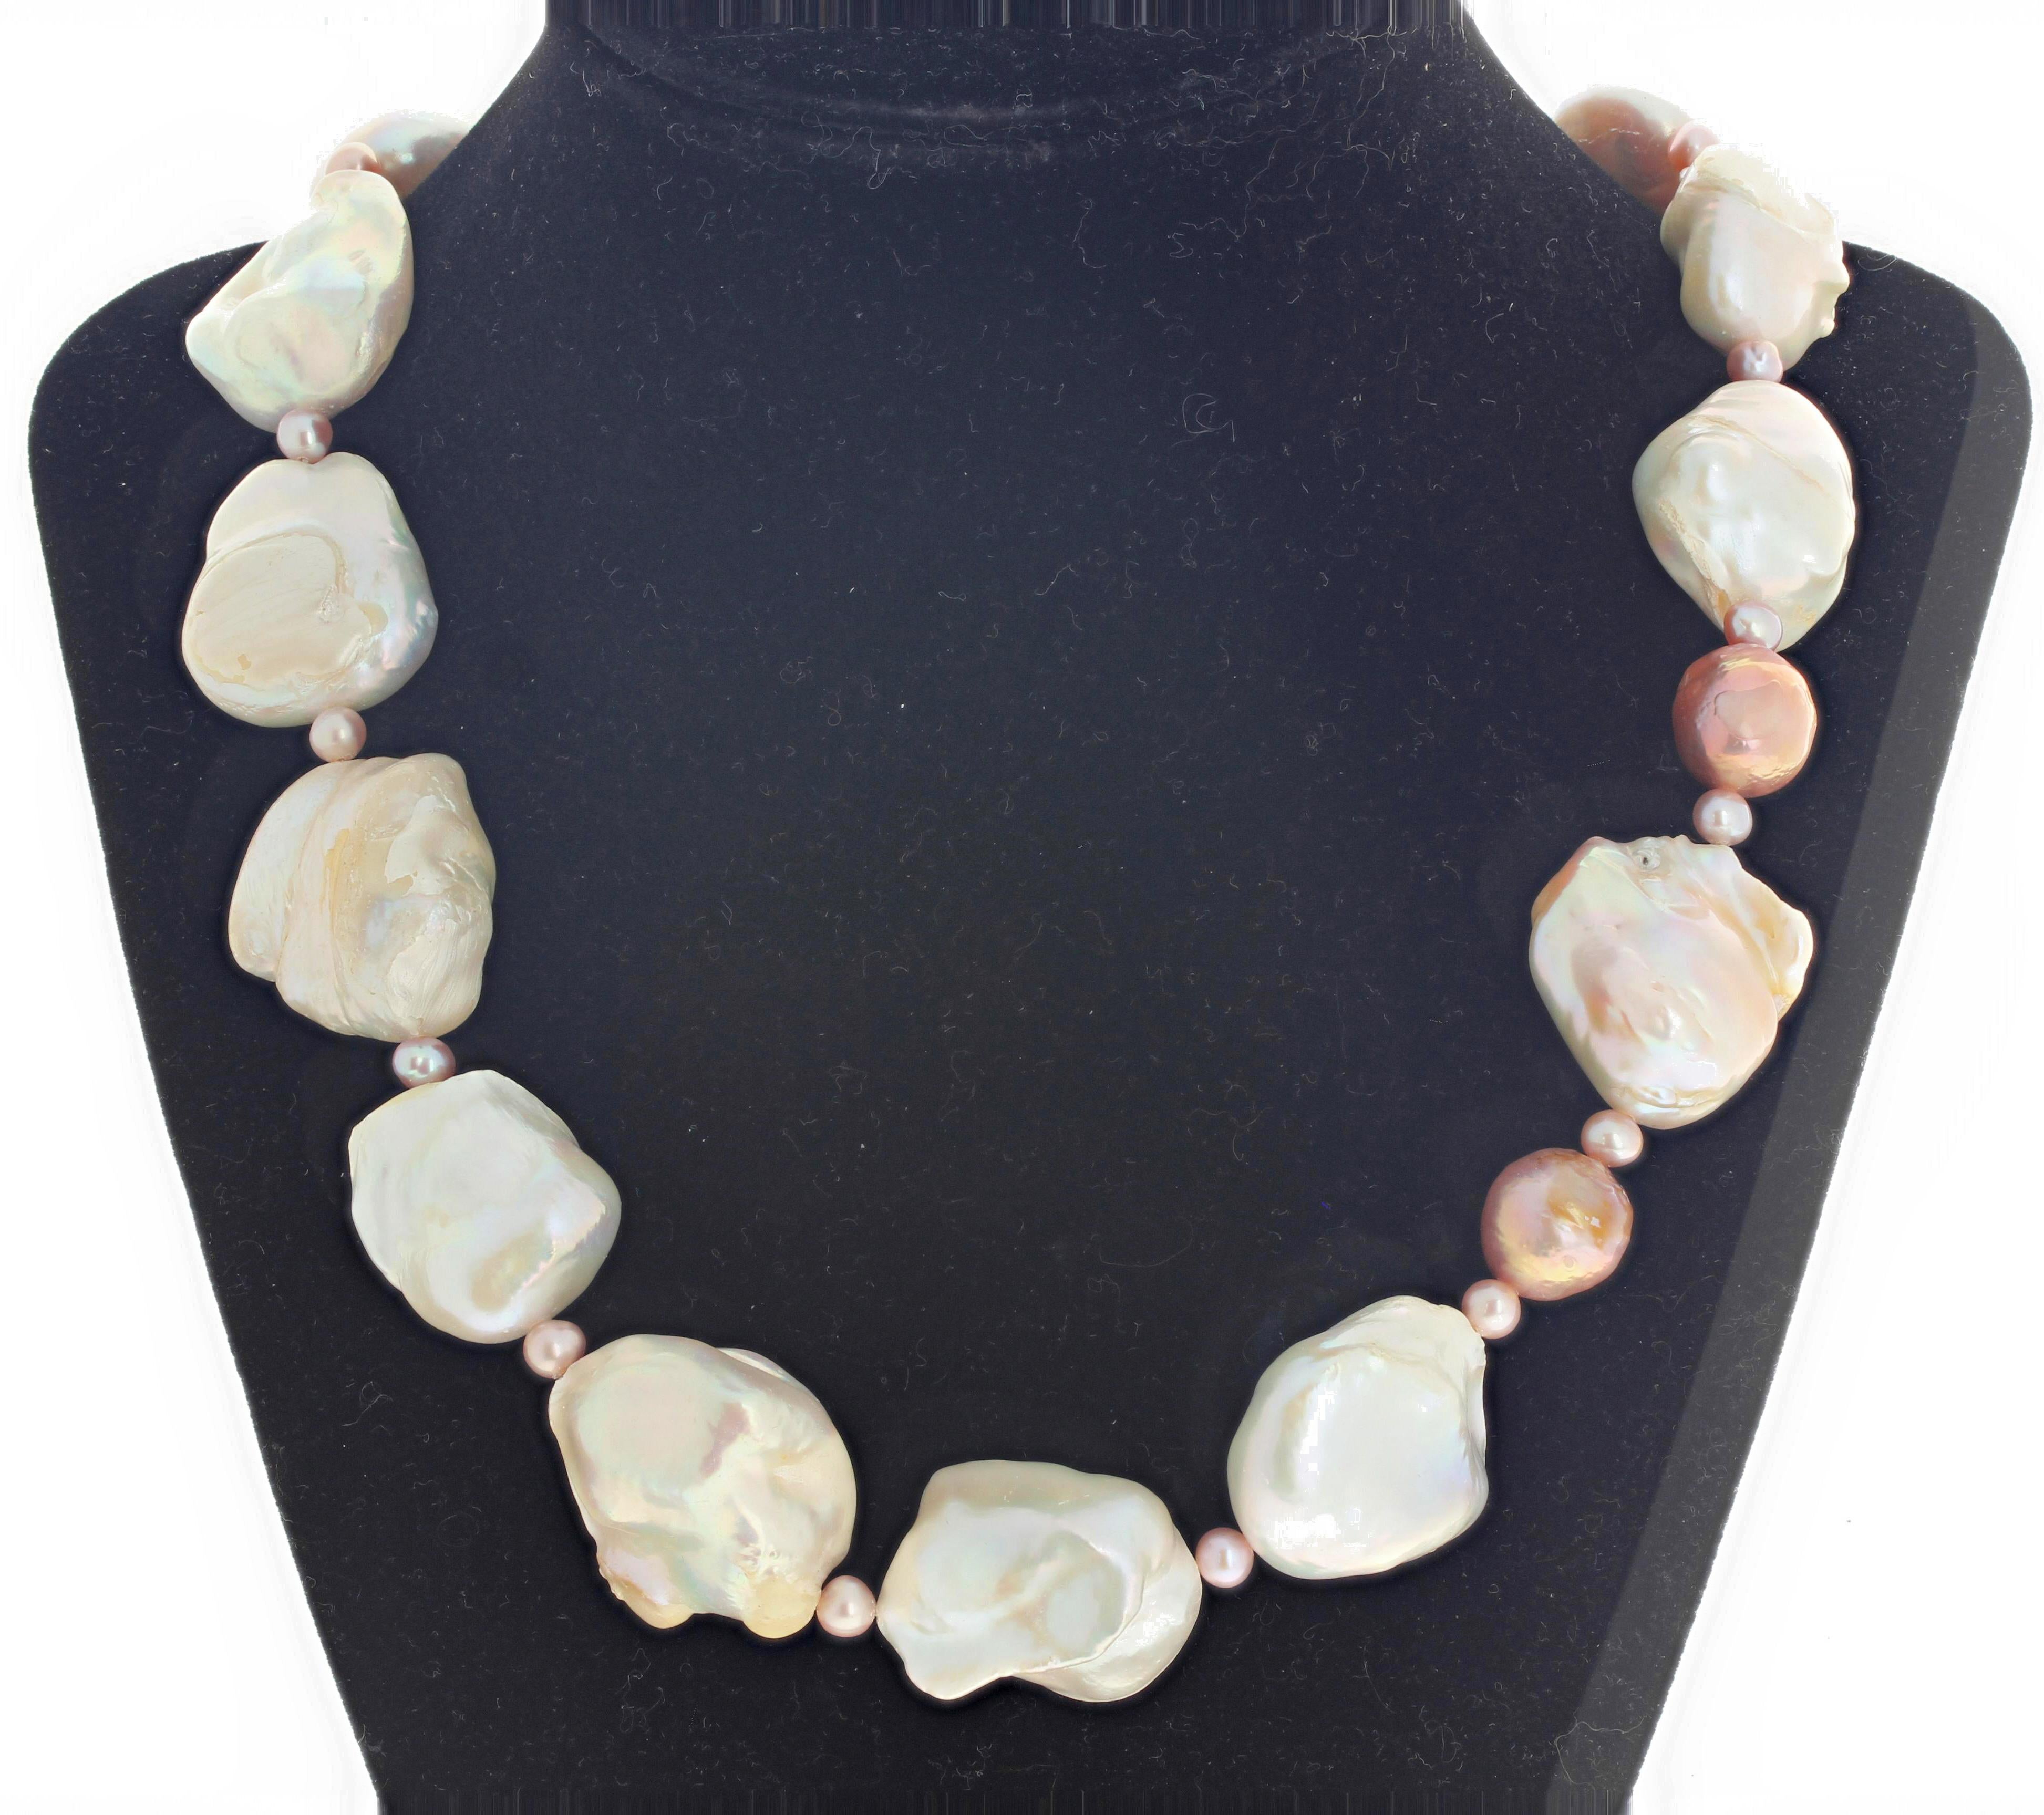 Beautiful elegant freshwater cultured Pearls (the largest is approximately 25 mm x 25 mm) reflect elegantly with the natural cultured pinky Pearls set sideways down the necklace for a more dramatic effect.  This necklace is 22 inches long and the